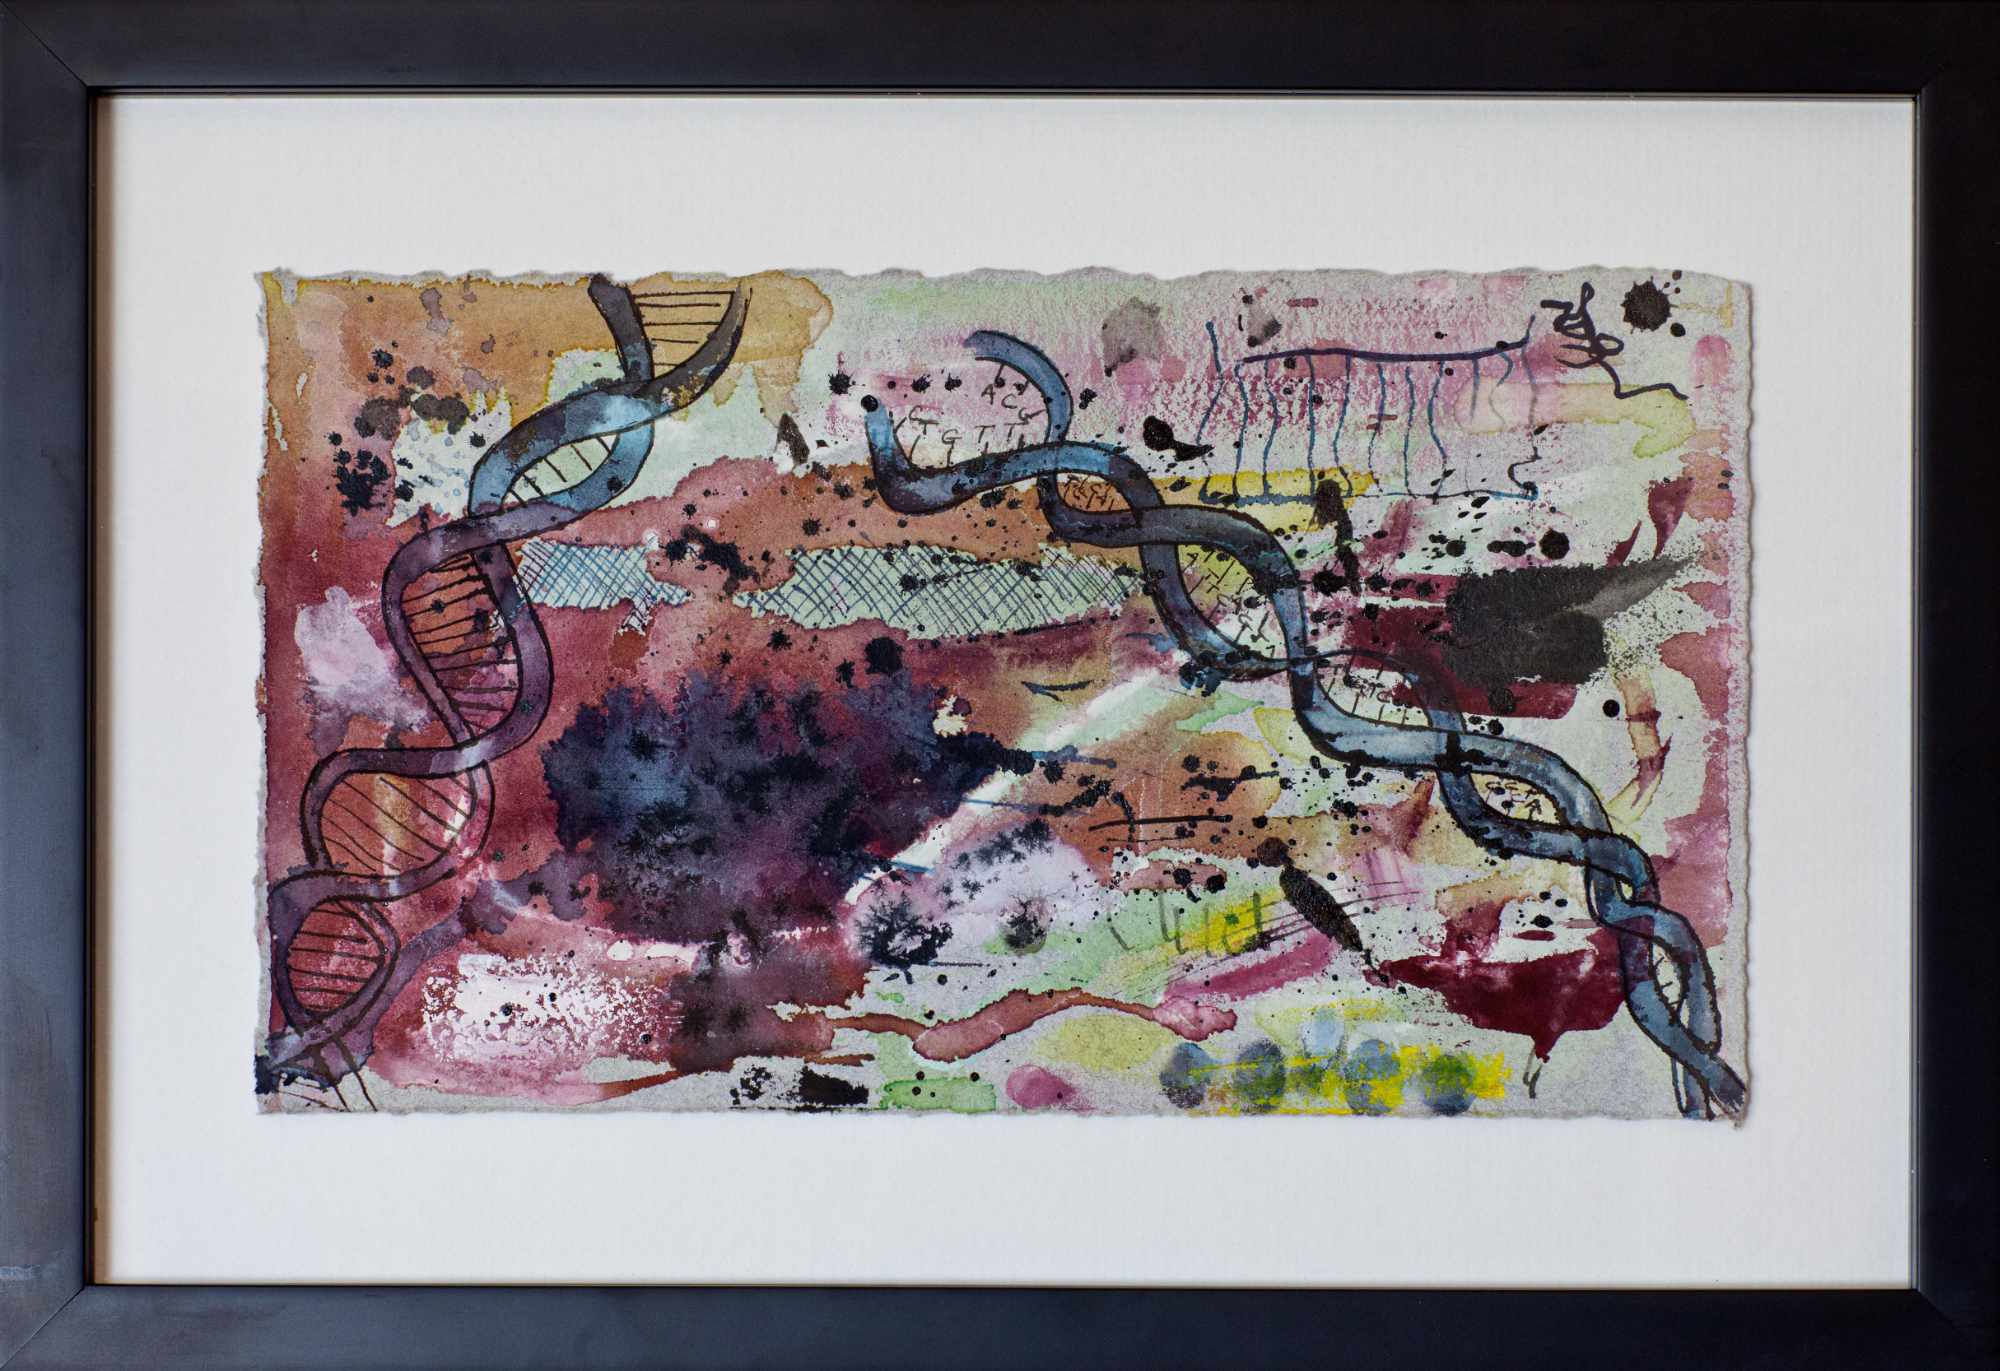 Corporeal Vlll - Mixed Media on Paper - 425 x 290mm